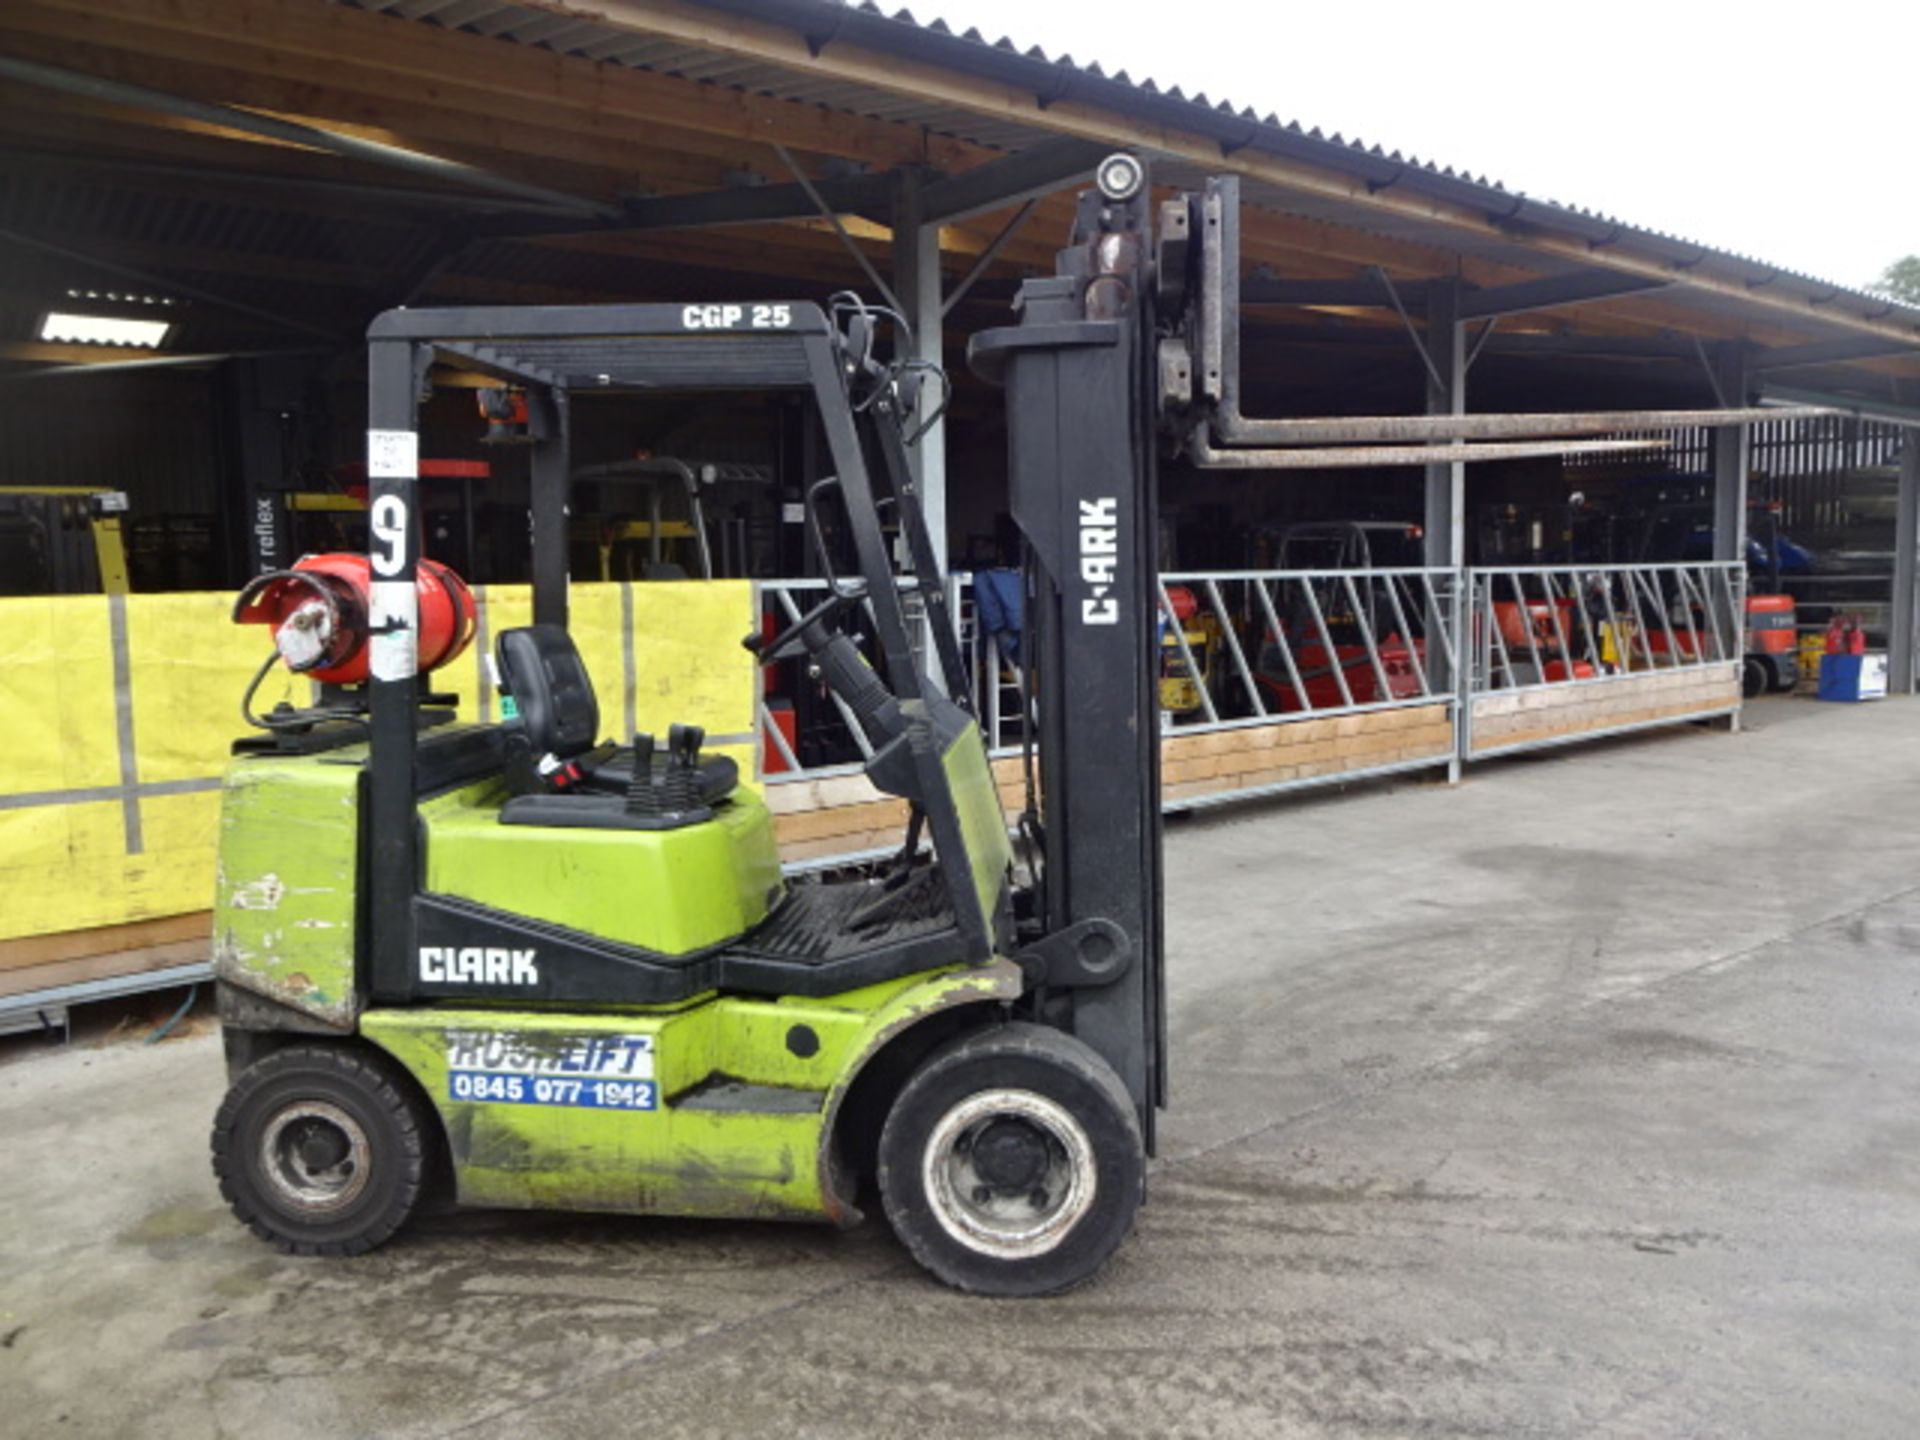 2002 CLARK CGP25 2.5t gas driven forklift truck S/n: 00899614 with triplex free-lift mast & side- - Image 9 of 10